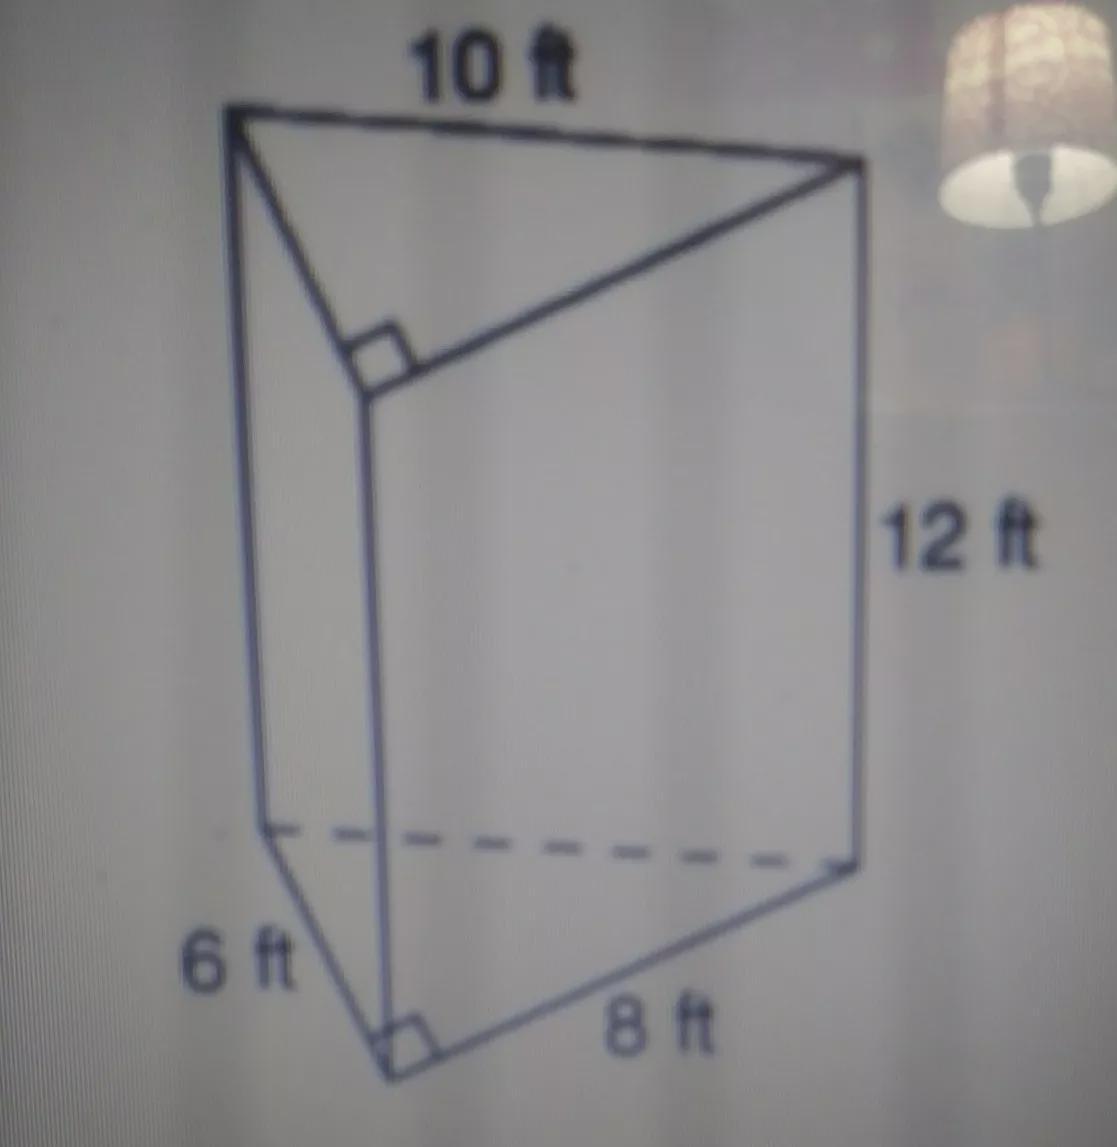 What Is The Value Of B ( Area Of The Base) For The Following Triangular Prism?40 Ft^248 Ft^260 Ft^224ft^2